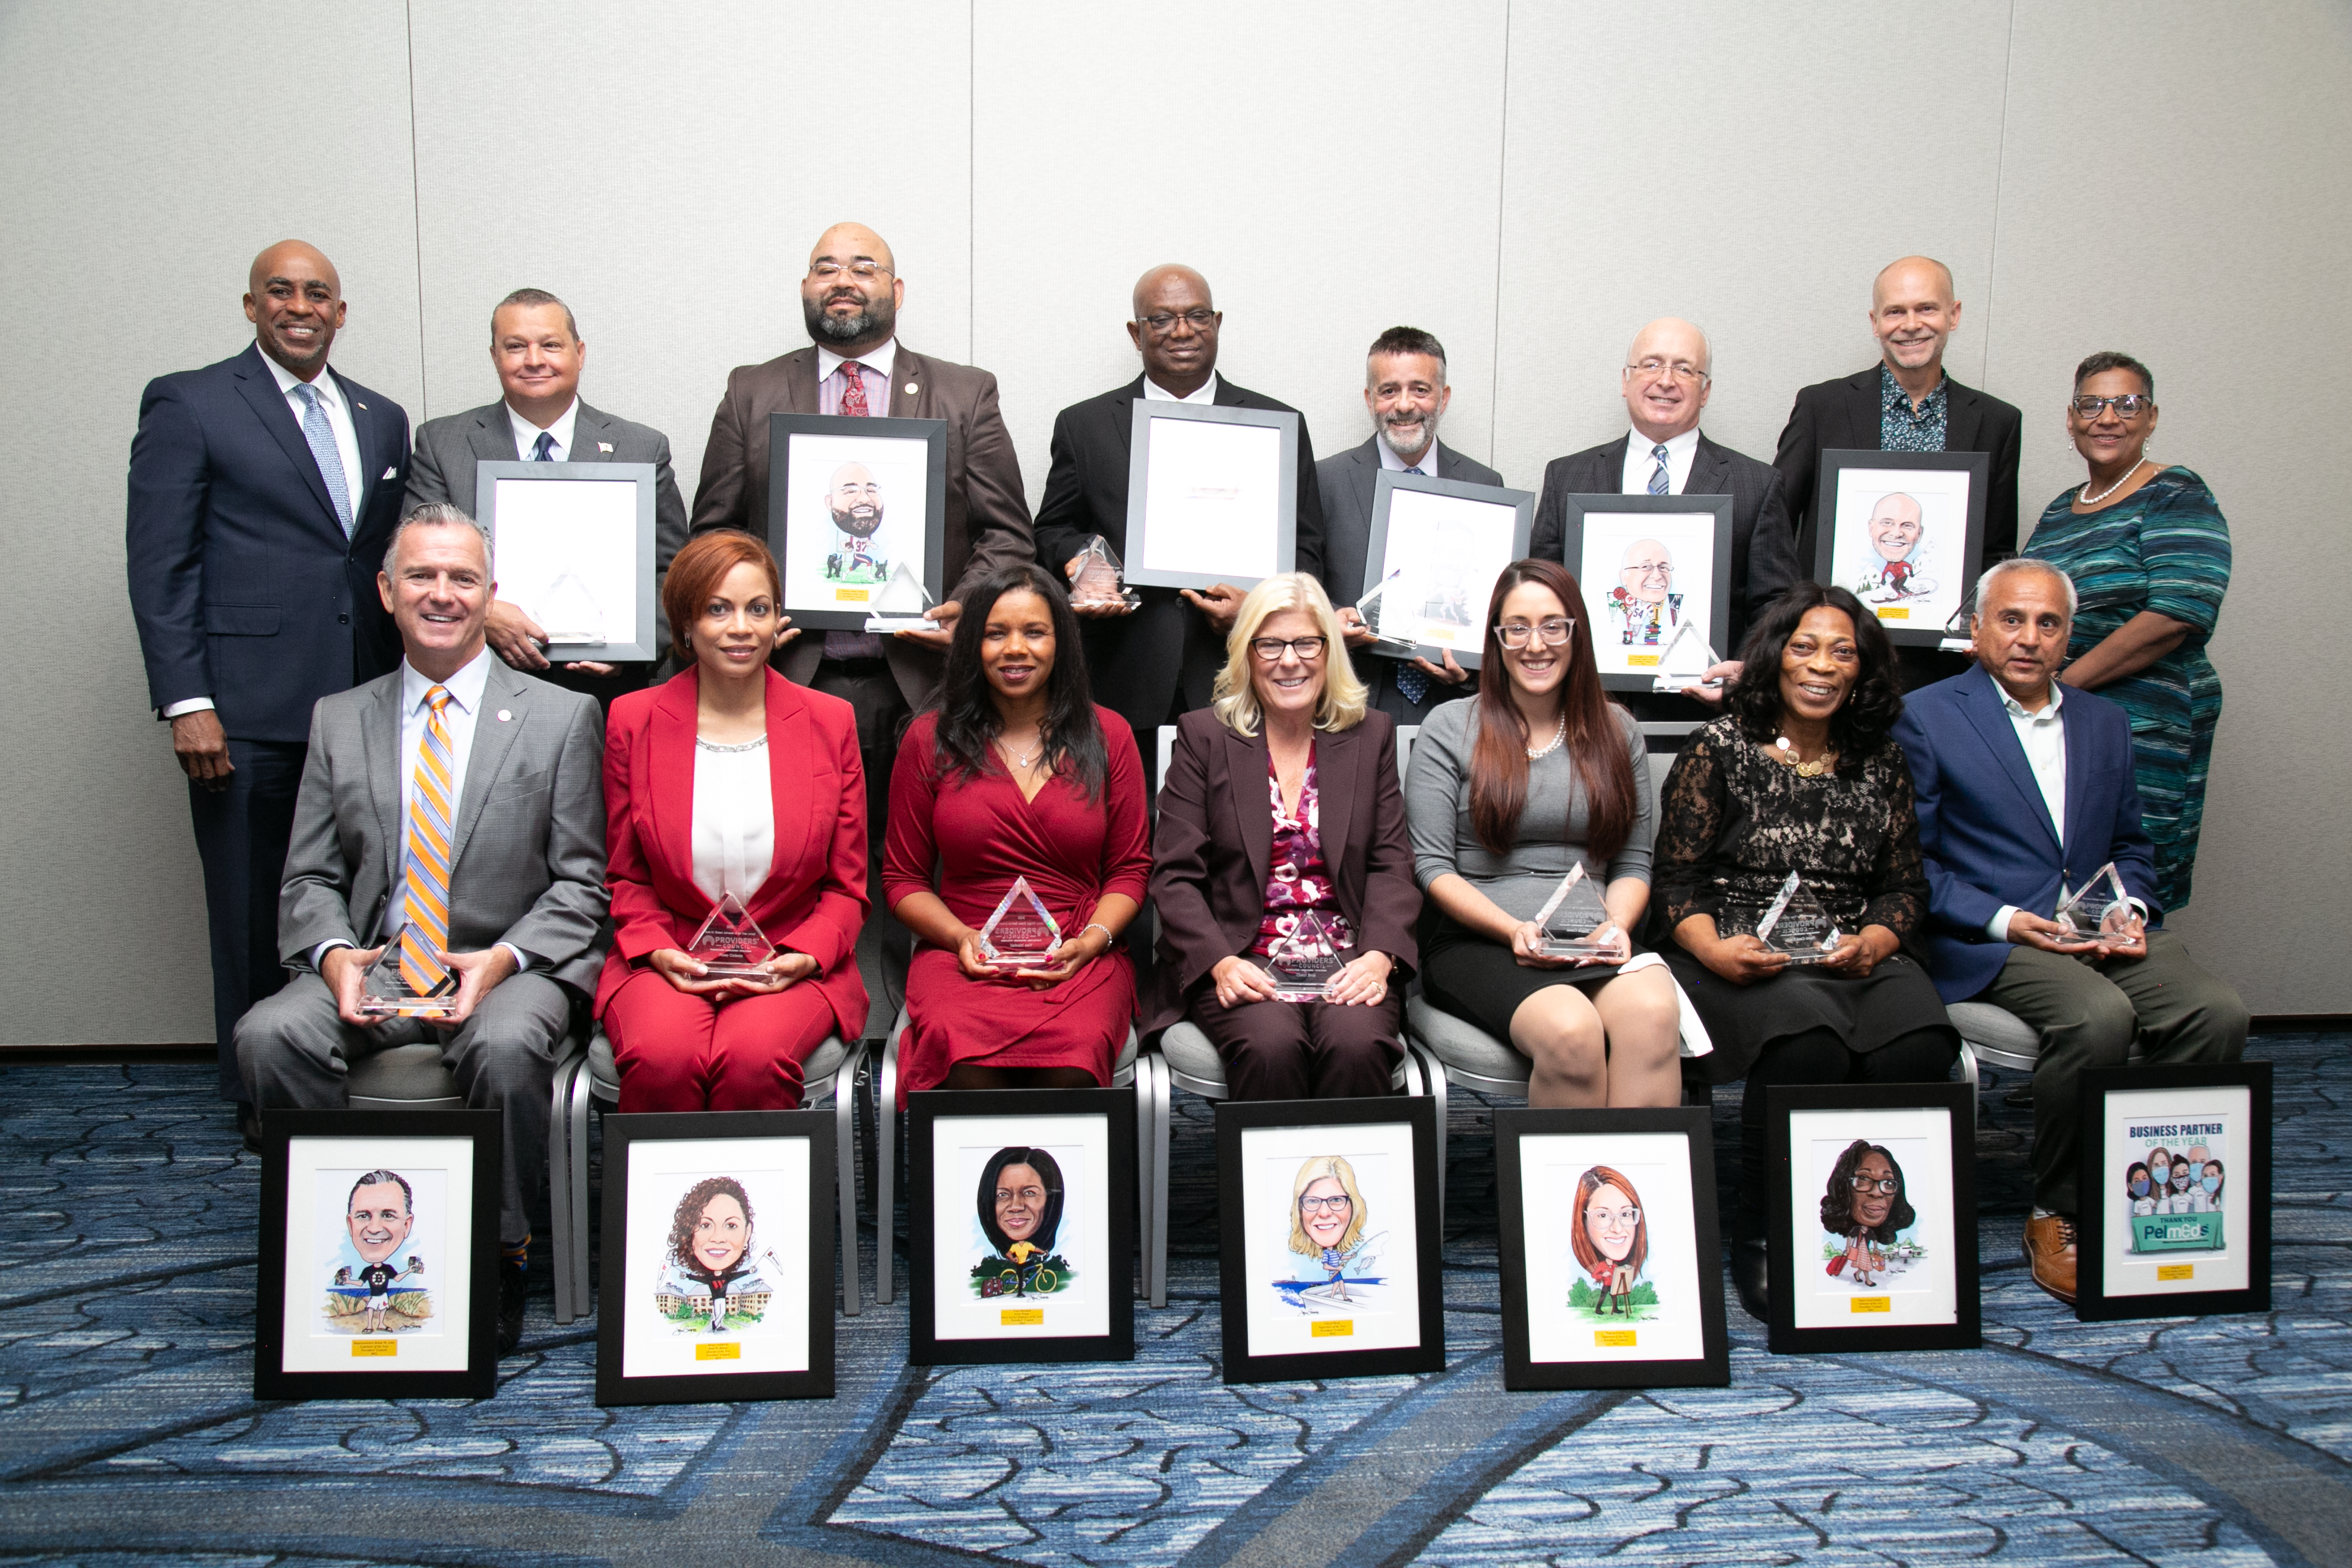 Honorees at the Providers' Council's annual conference earlier this month